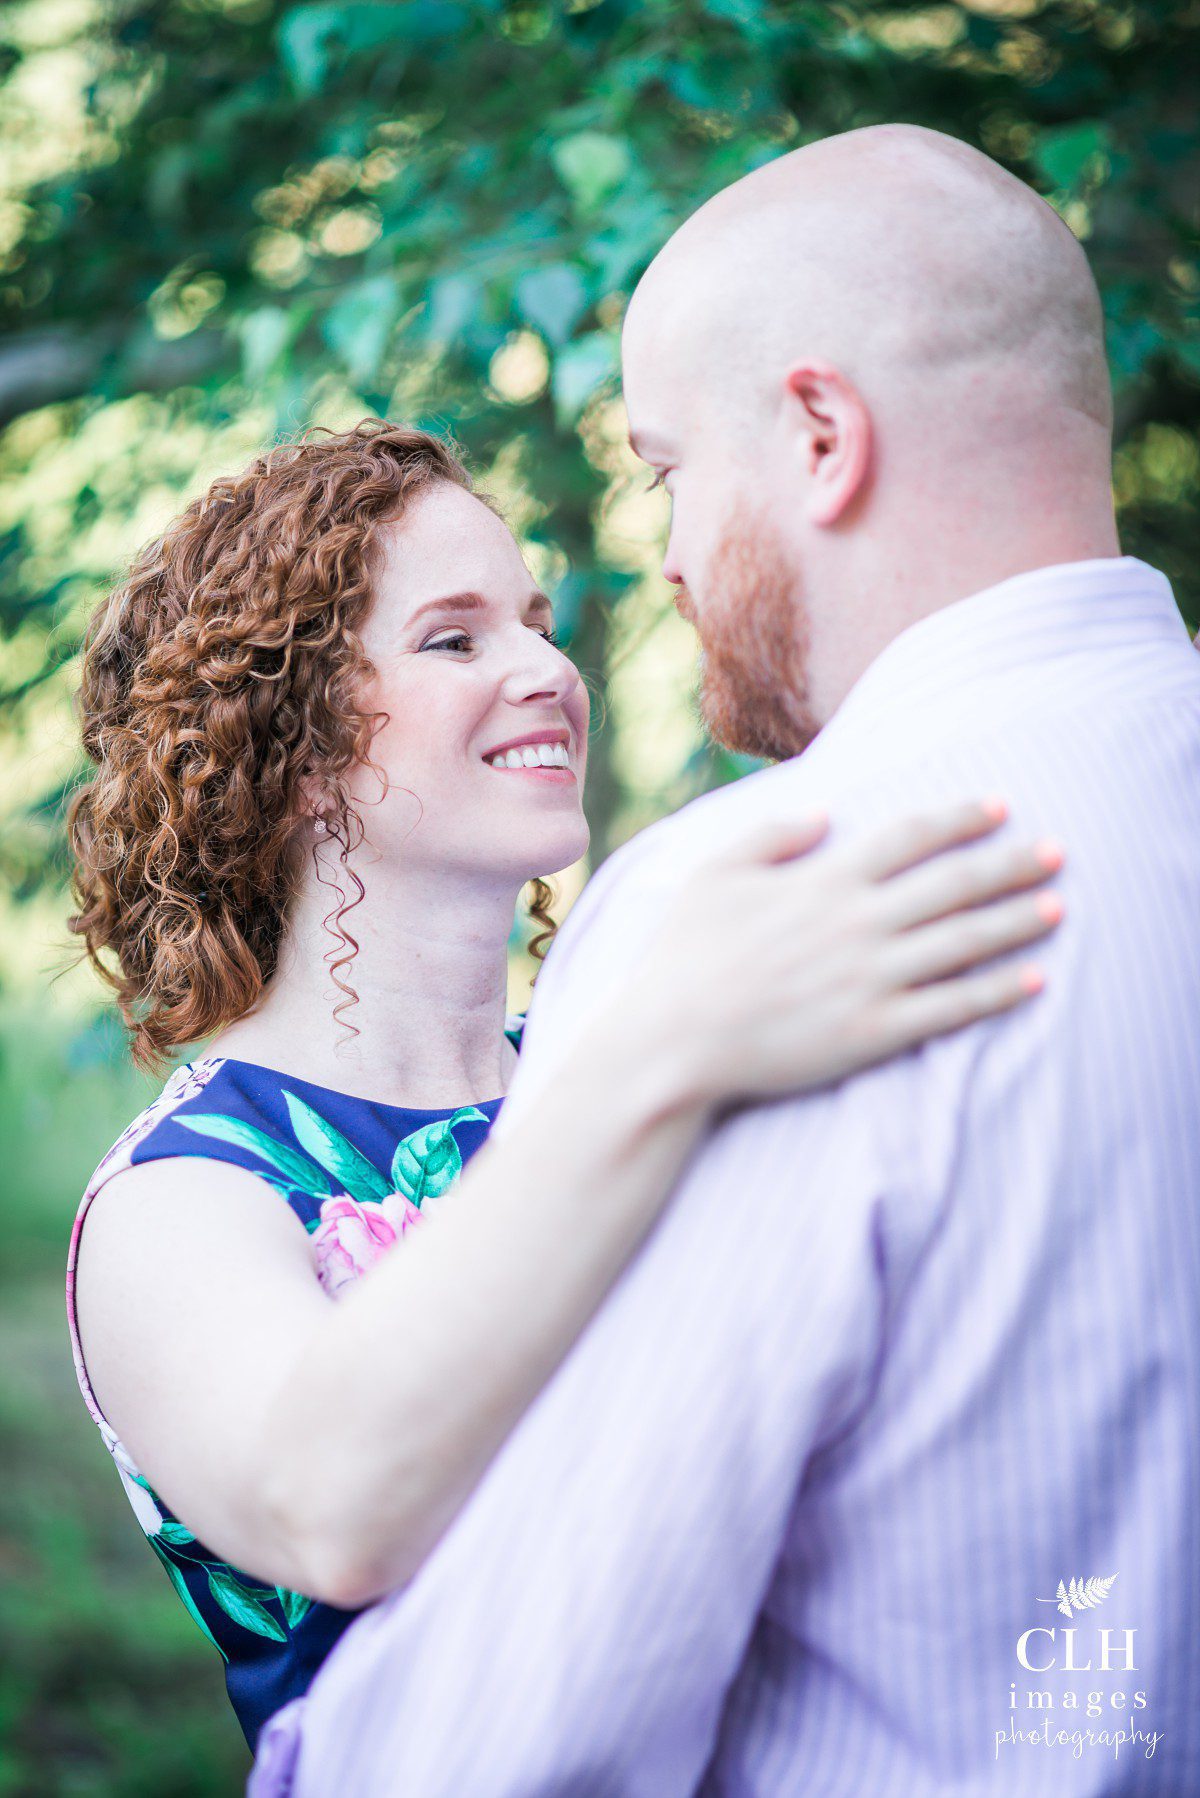 CLH images Photography - Country Engagement Session - Delanson New York - Engagement Photographer - Ashley and Peter (8)